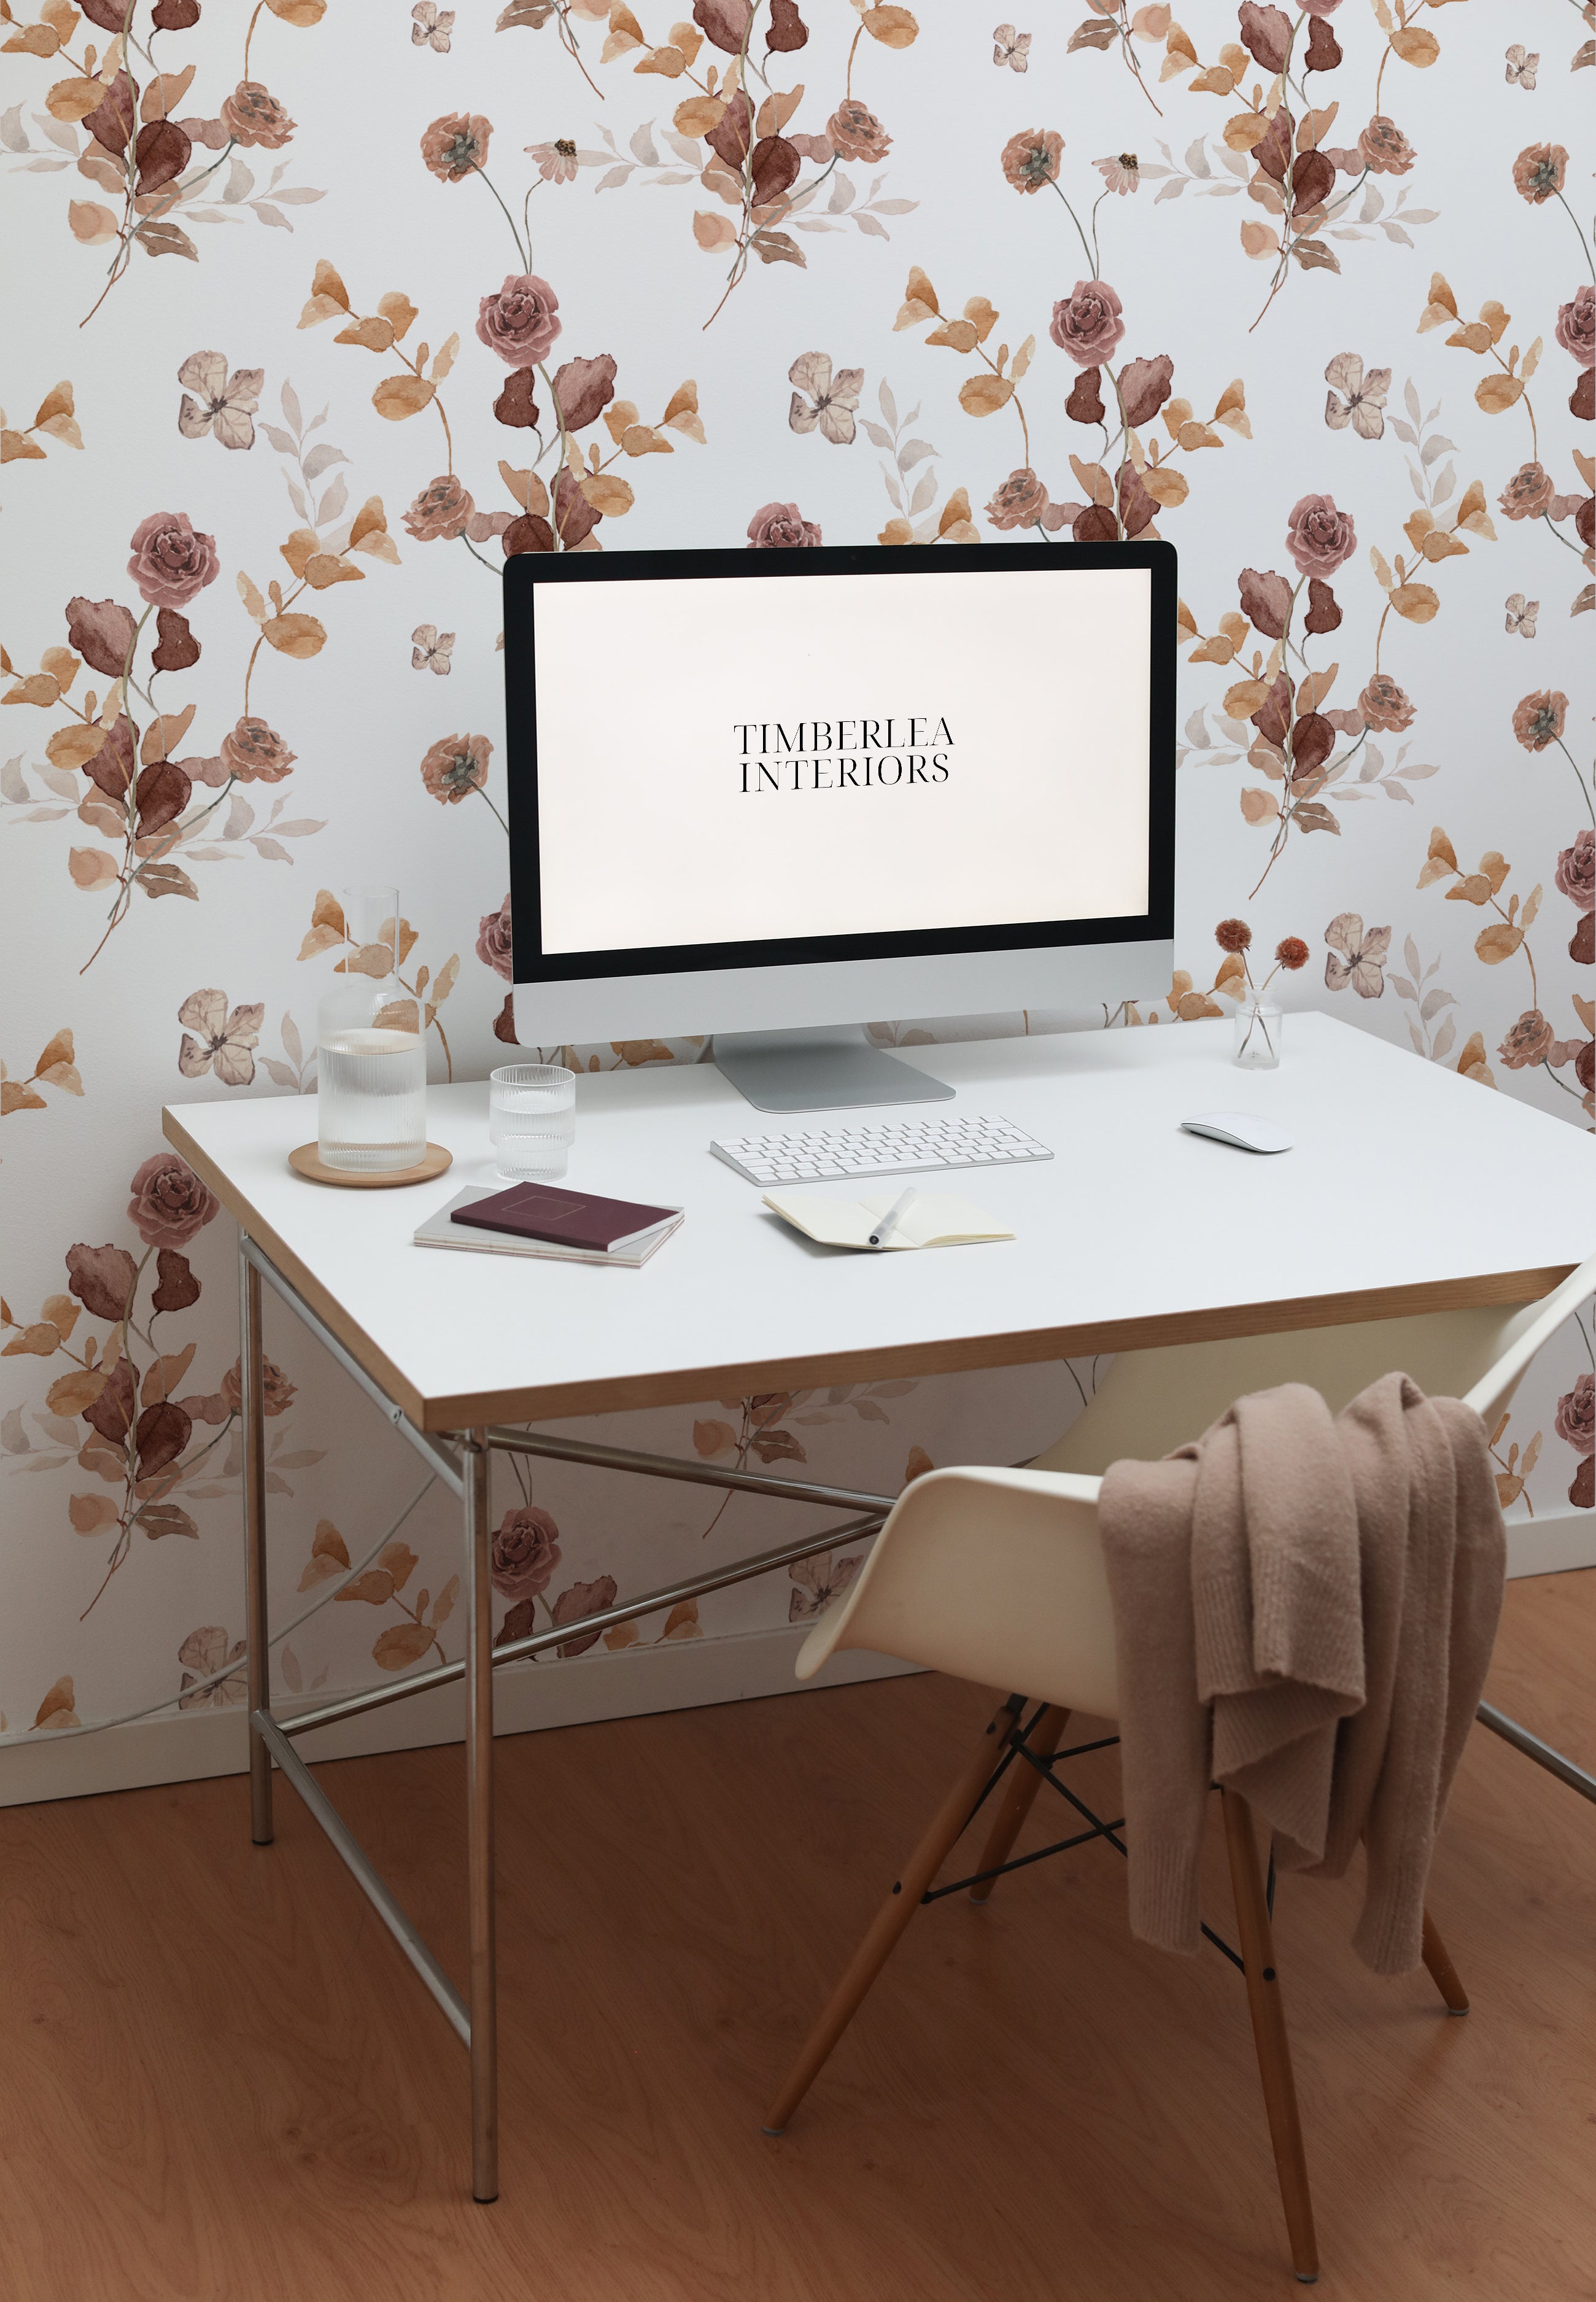 Personalizing Your Workspace: Wallpaper Ideas for Home Offices